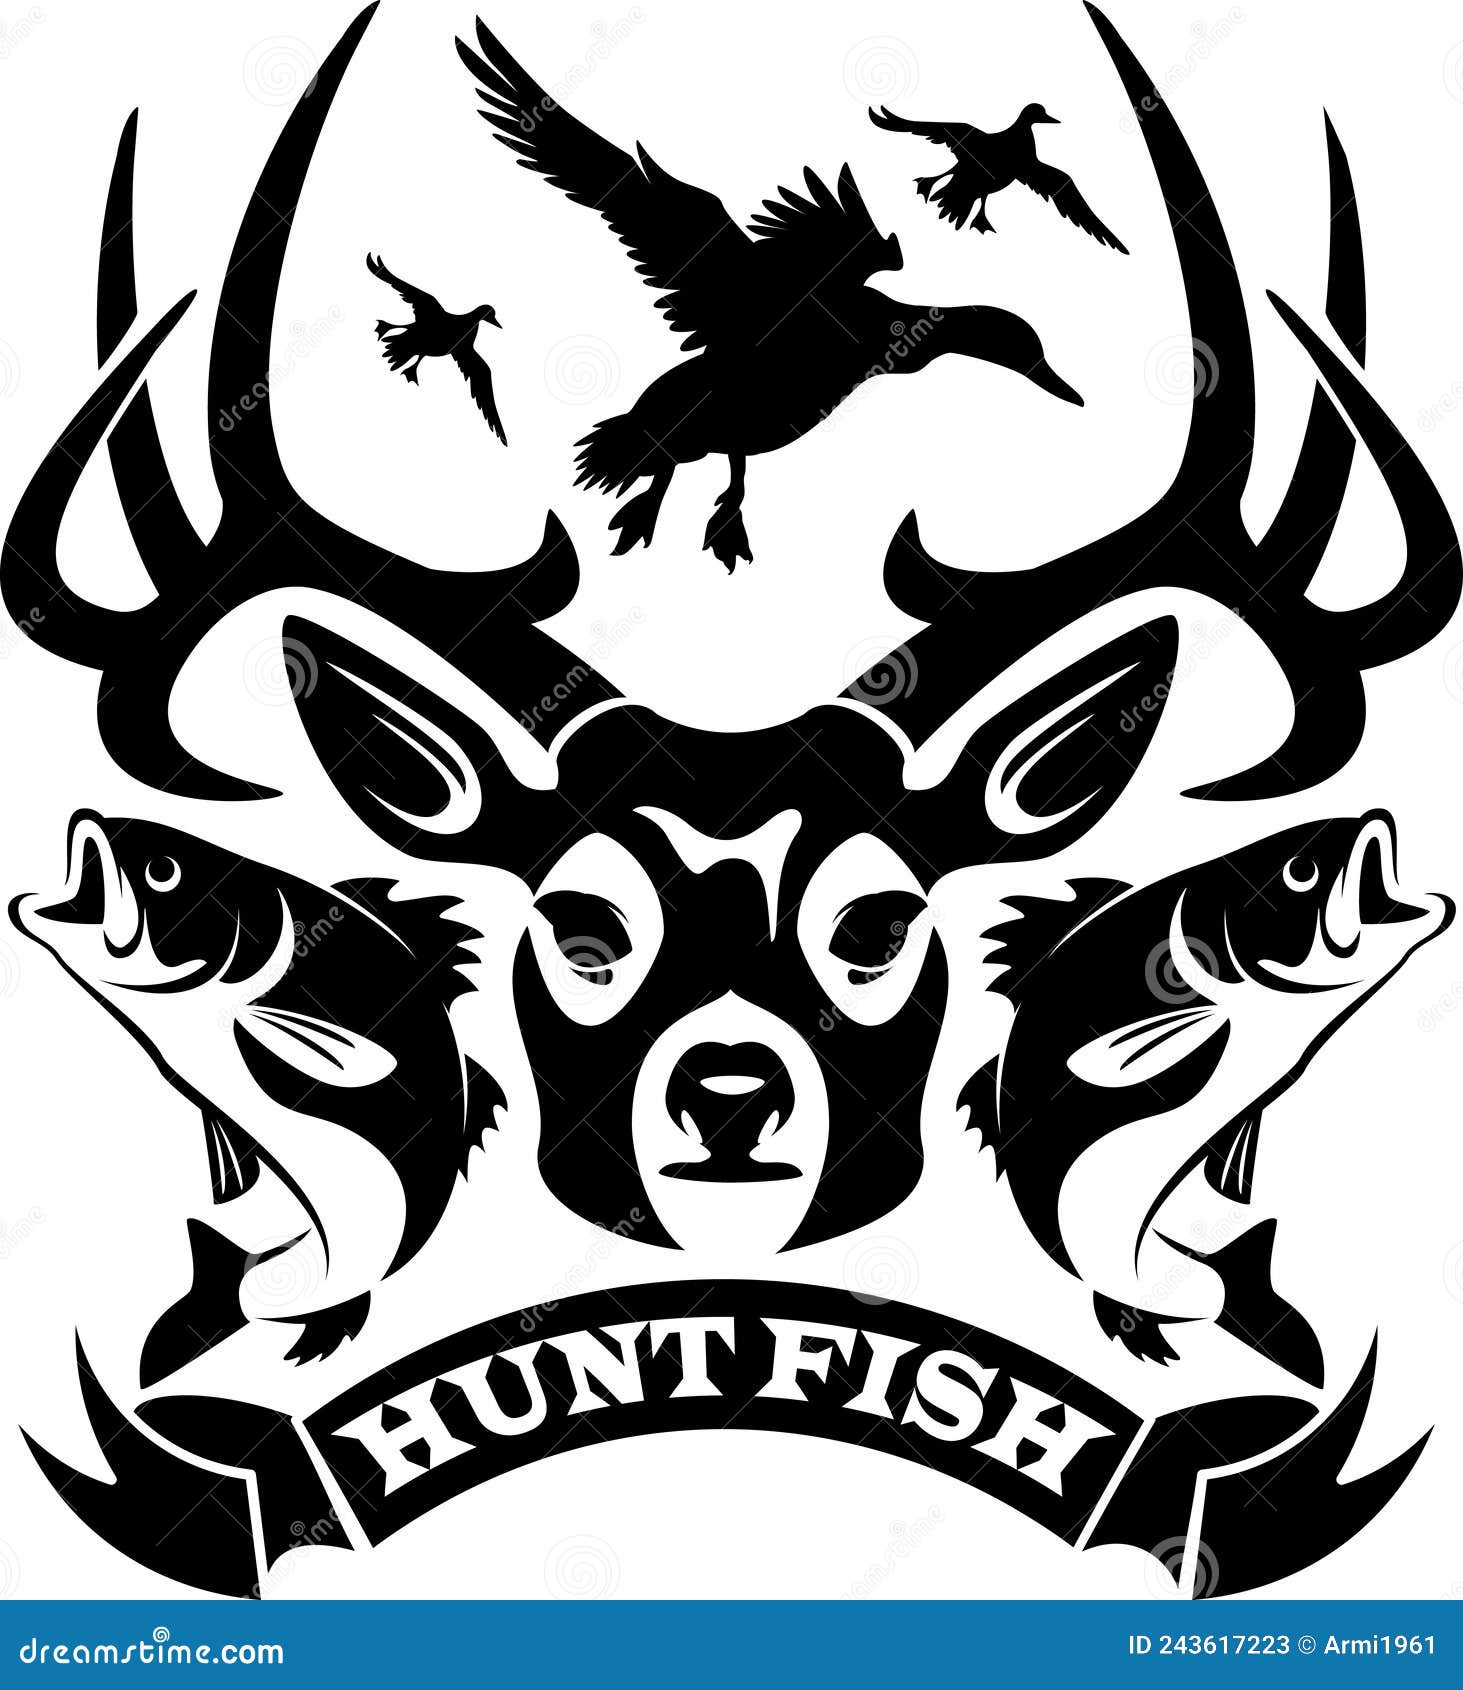 Hunting and Fishing Vector Background Logo Stock Vector - Illustration of  isolated, outdoorsman: 243617223